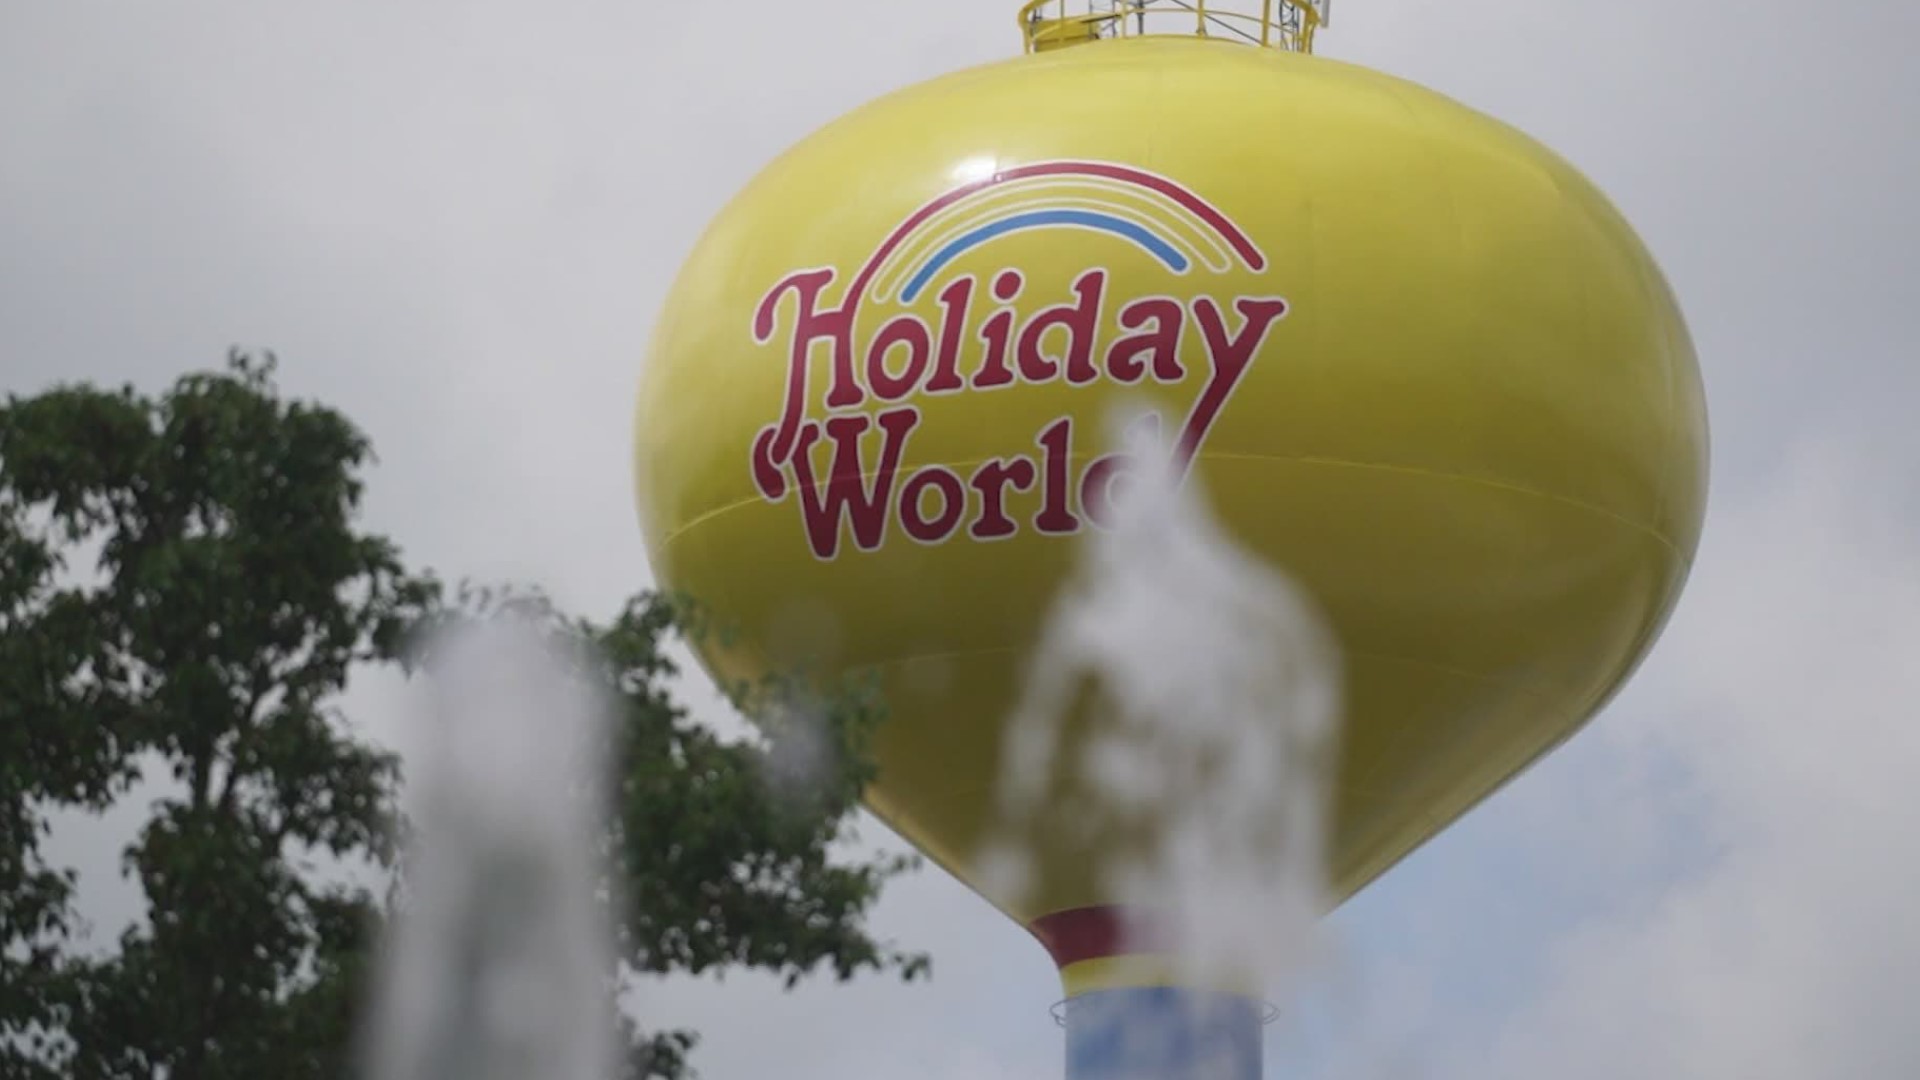 All portions of Holiday World & Splashin' Safari have opened, though at reduced capacity and with new safety measures.